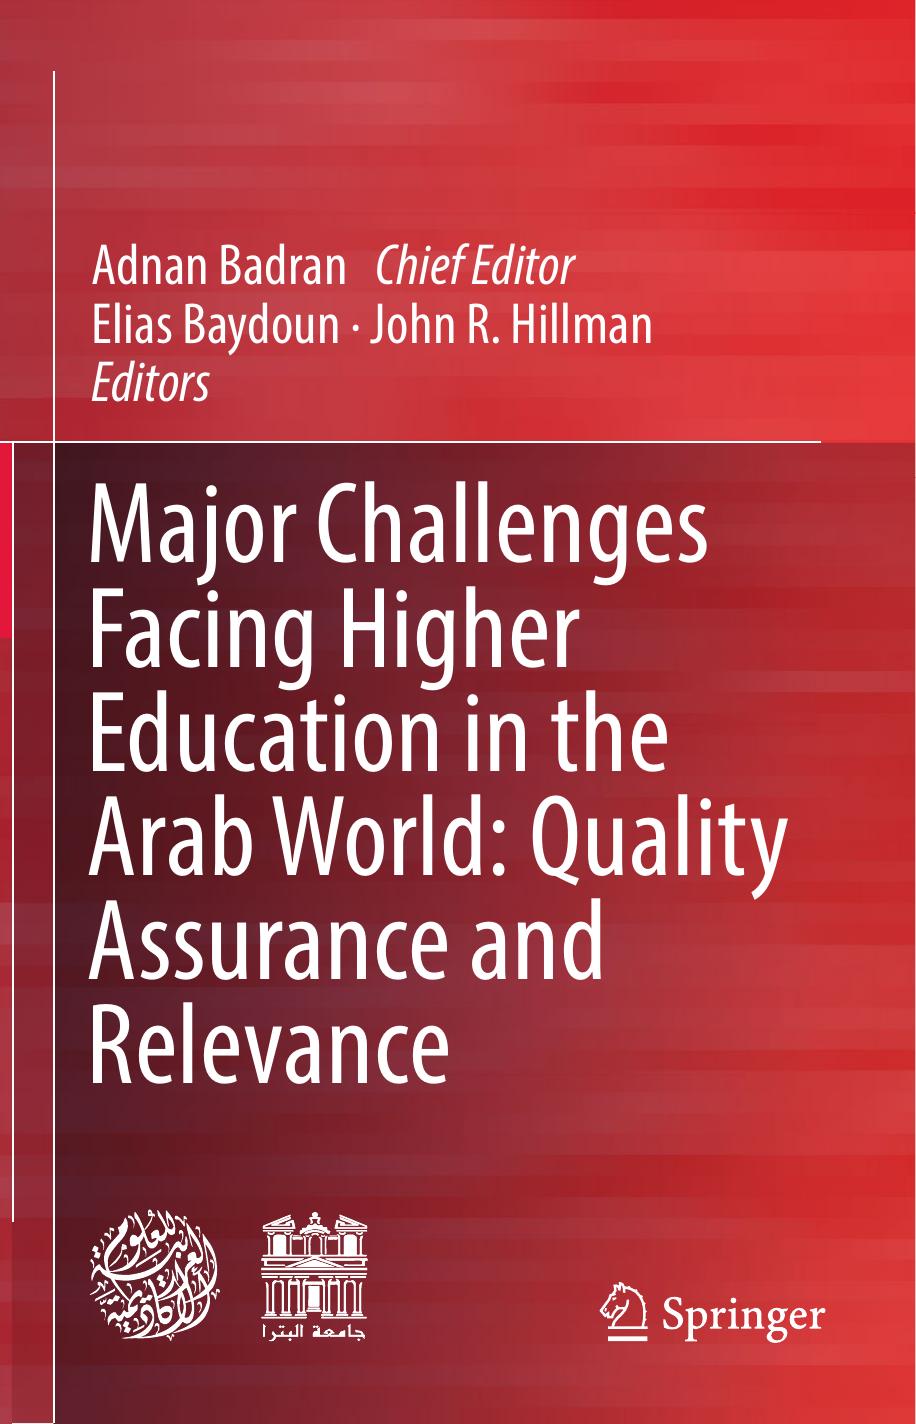 Major Challenges Facing Higher Education in the Arab world 2019